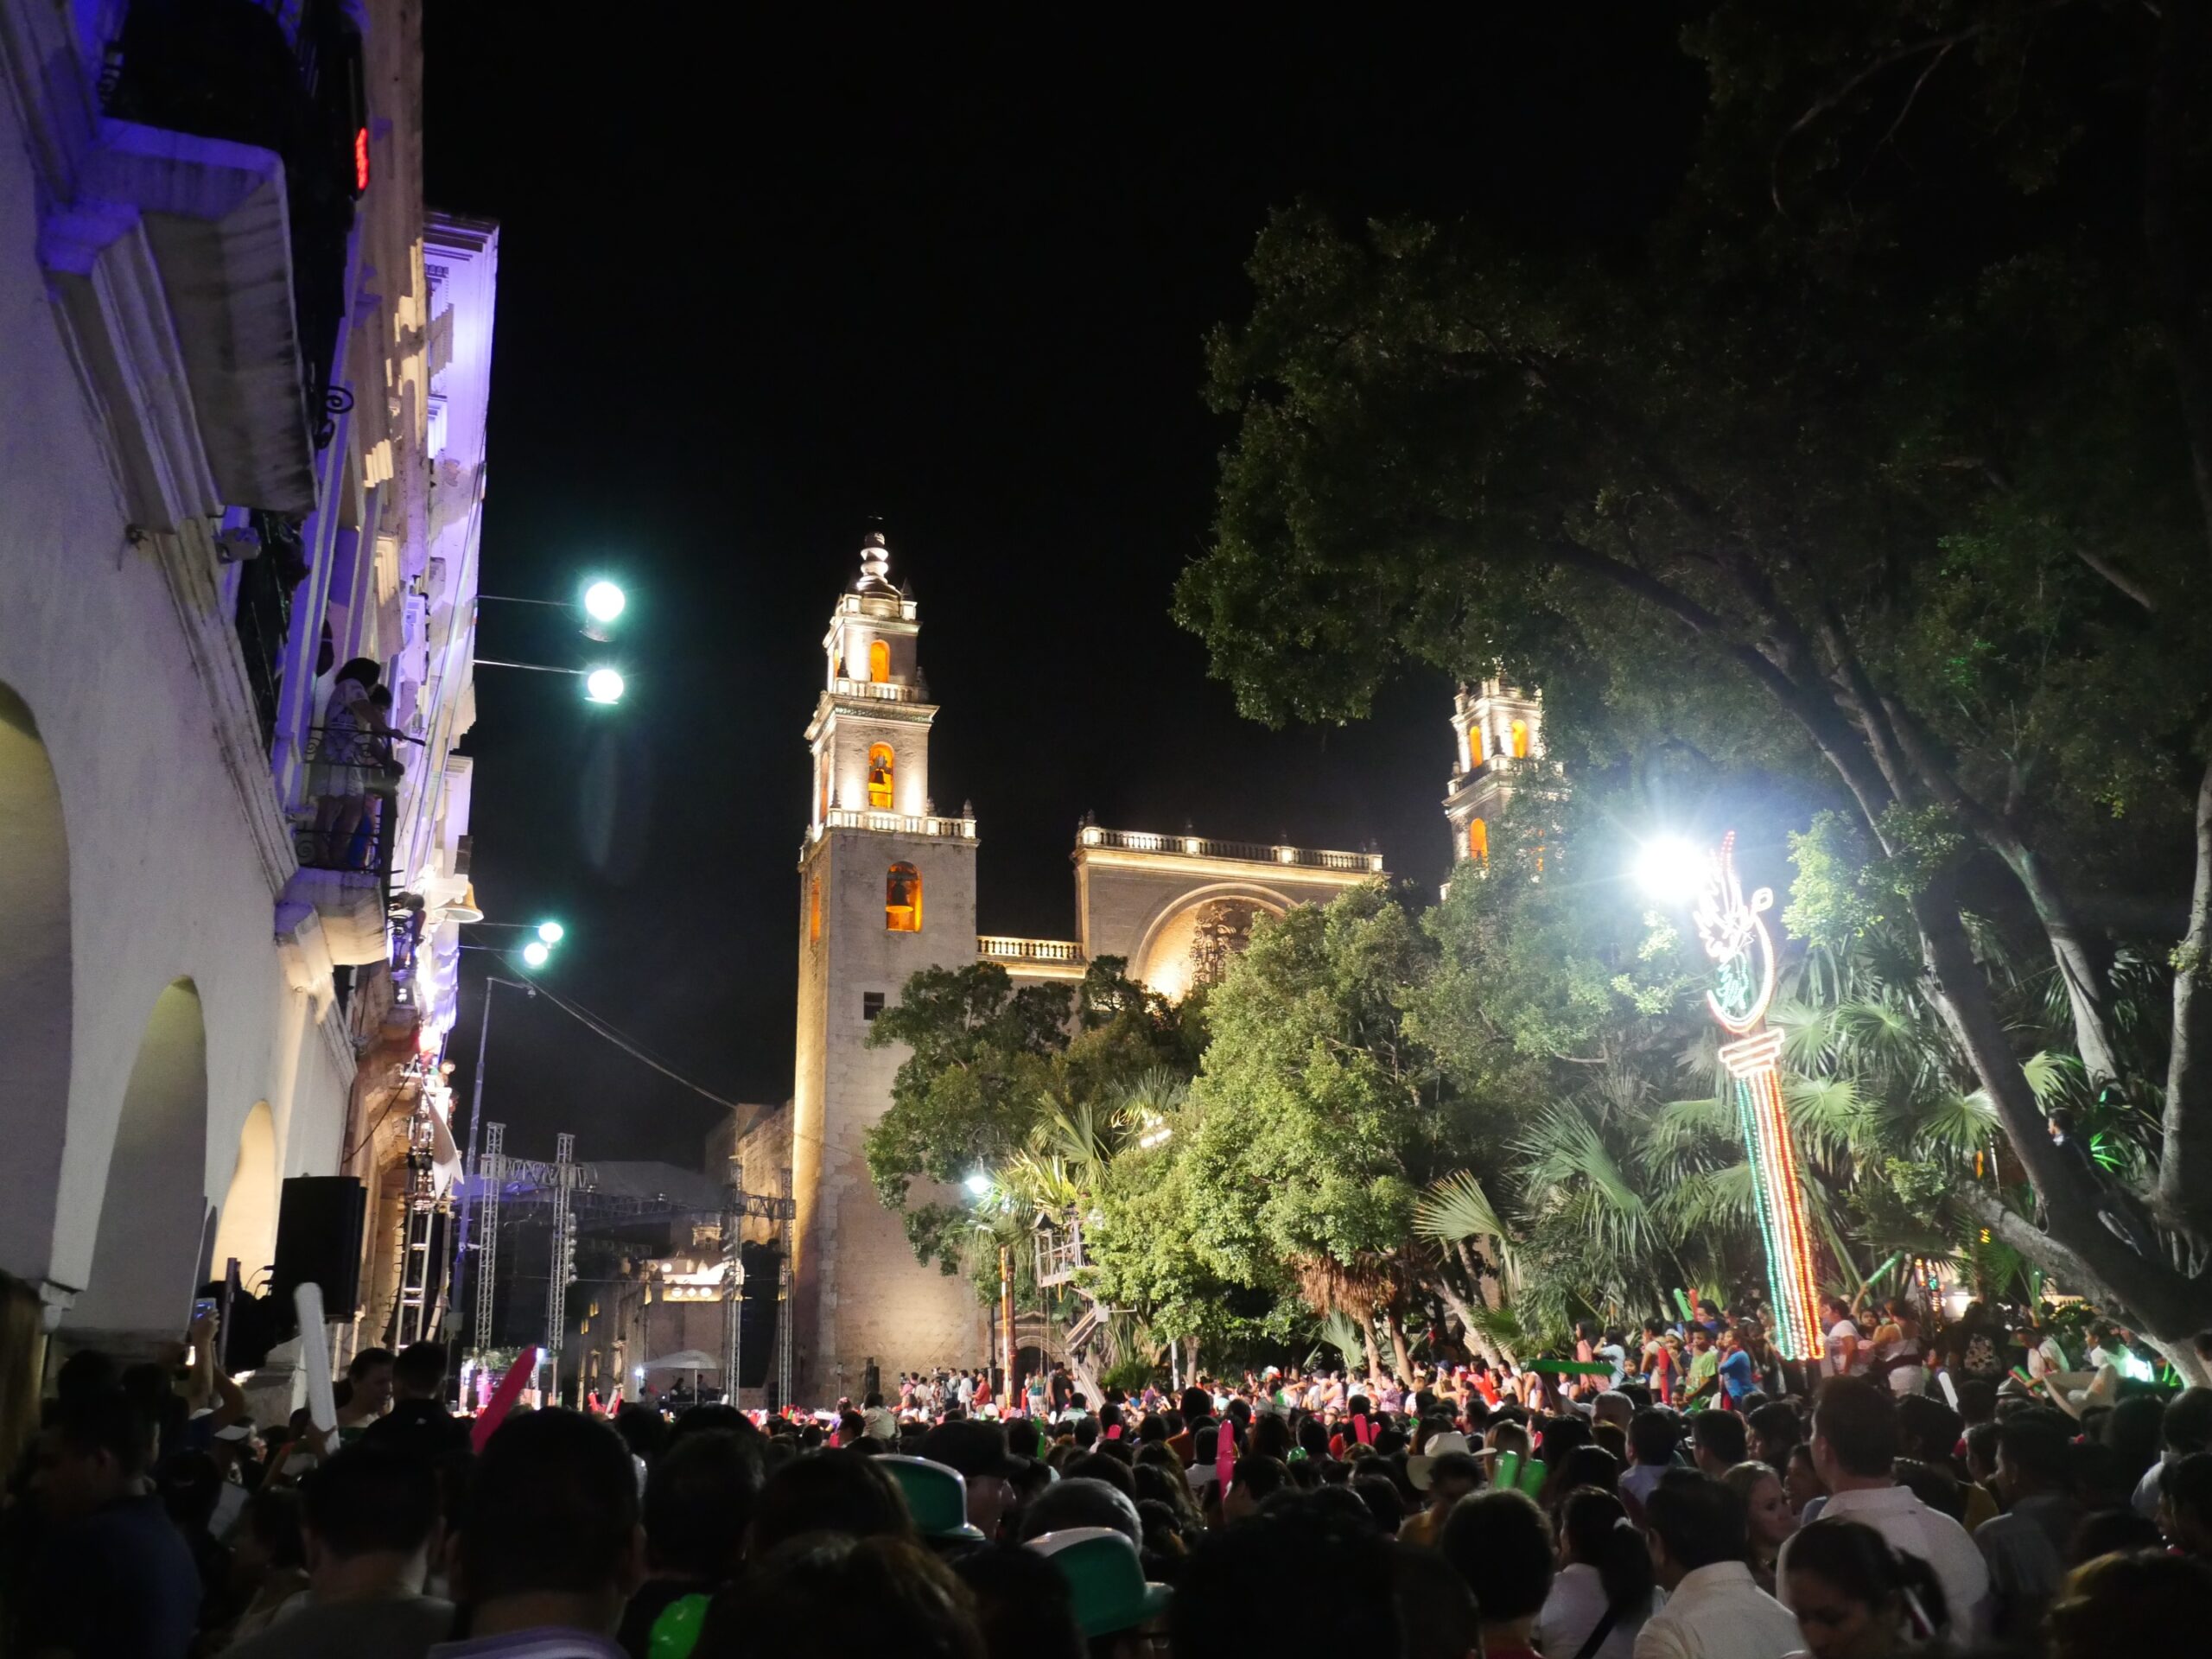 Crowds gather to watch Mexican band Intocable for Mexican Independence Day in Mérida, Mexico.